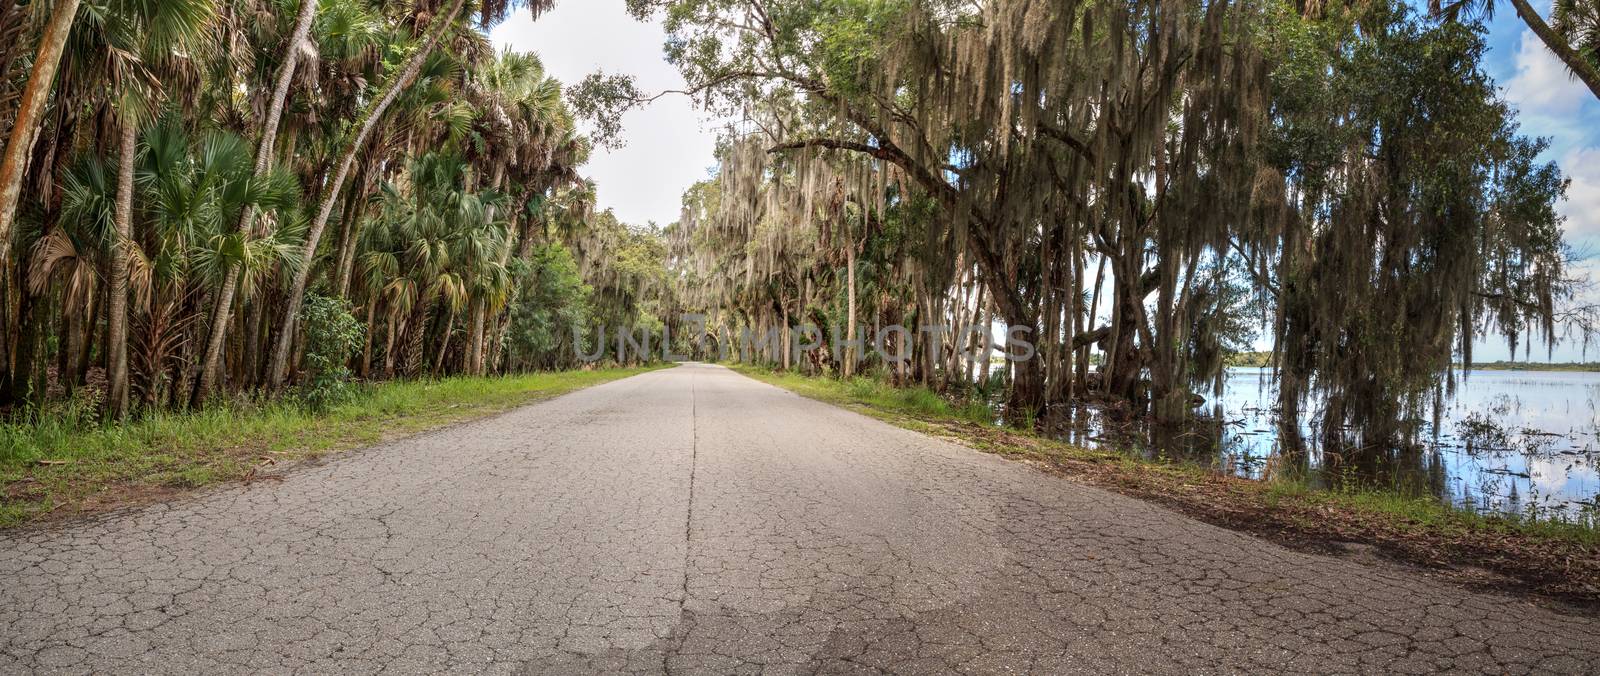 Spanish  moss hangs from trees that line the road in Seasonal flooded swamp of Myakka River State Park in Sarasota, Florida.